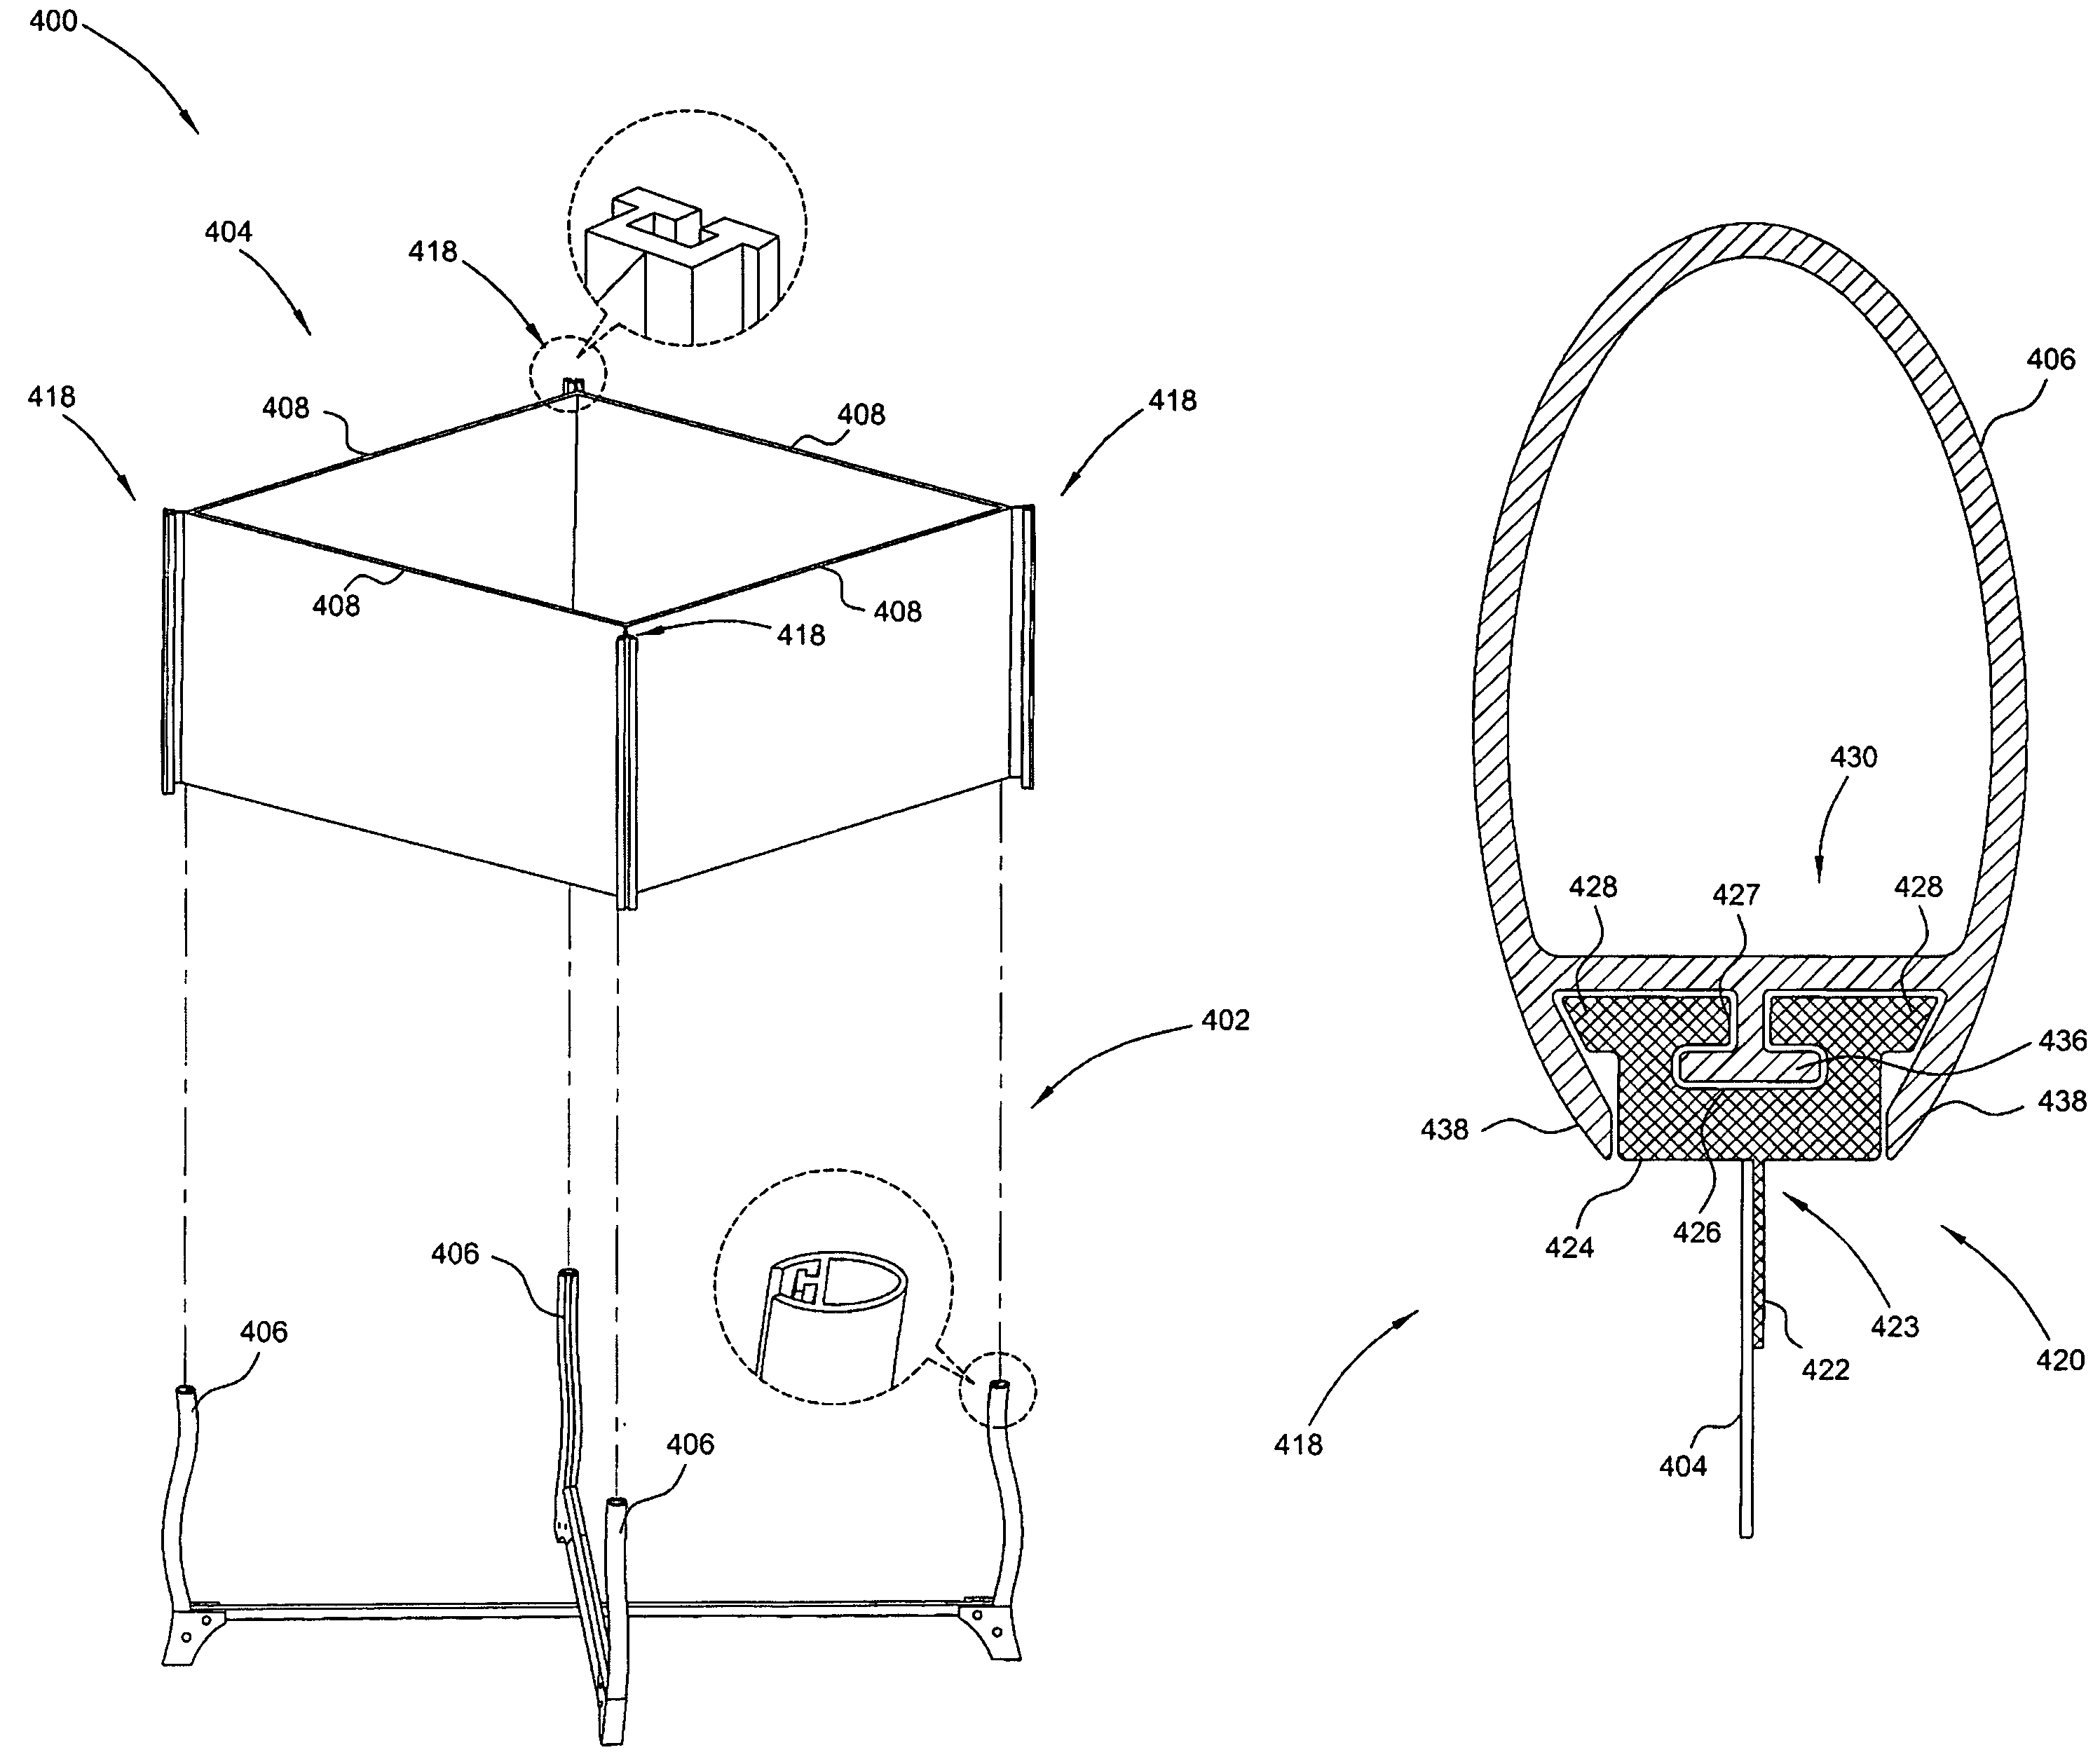 System and method of assembling a nursery device for supporting a baby occupant